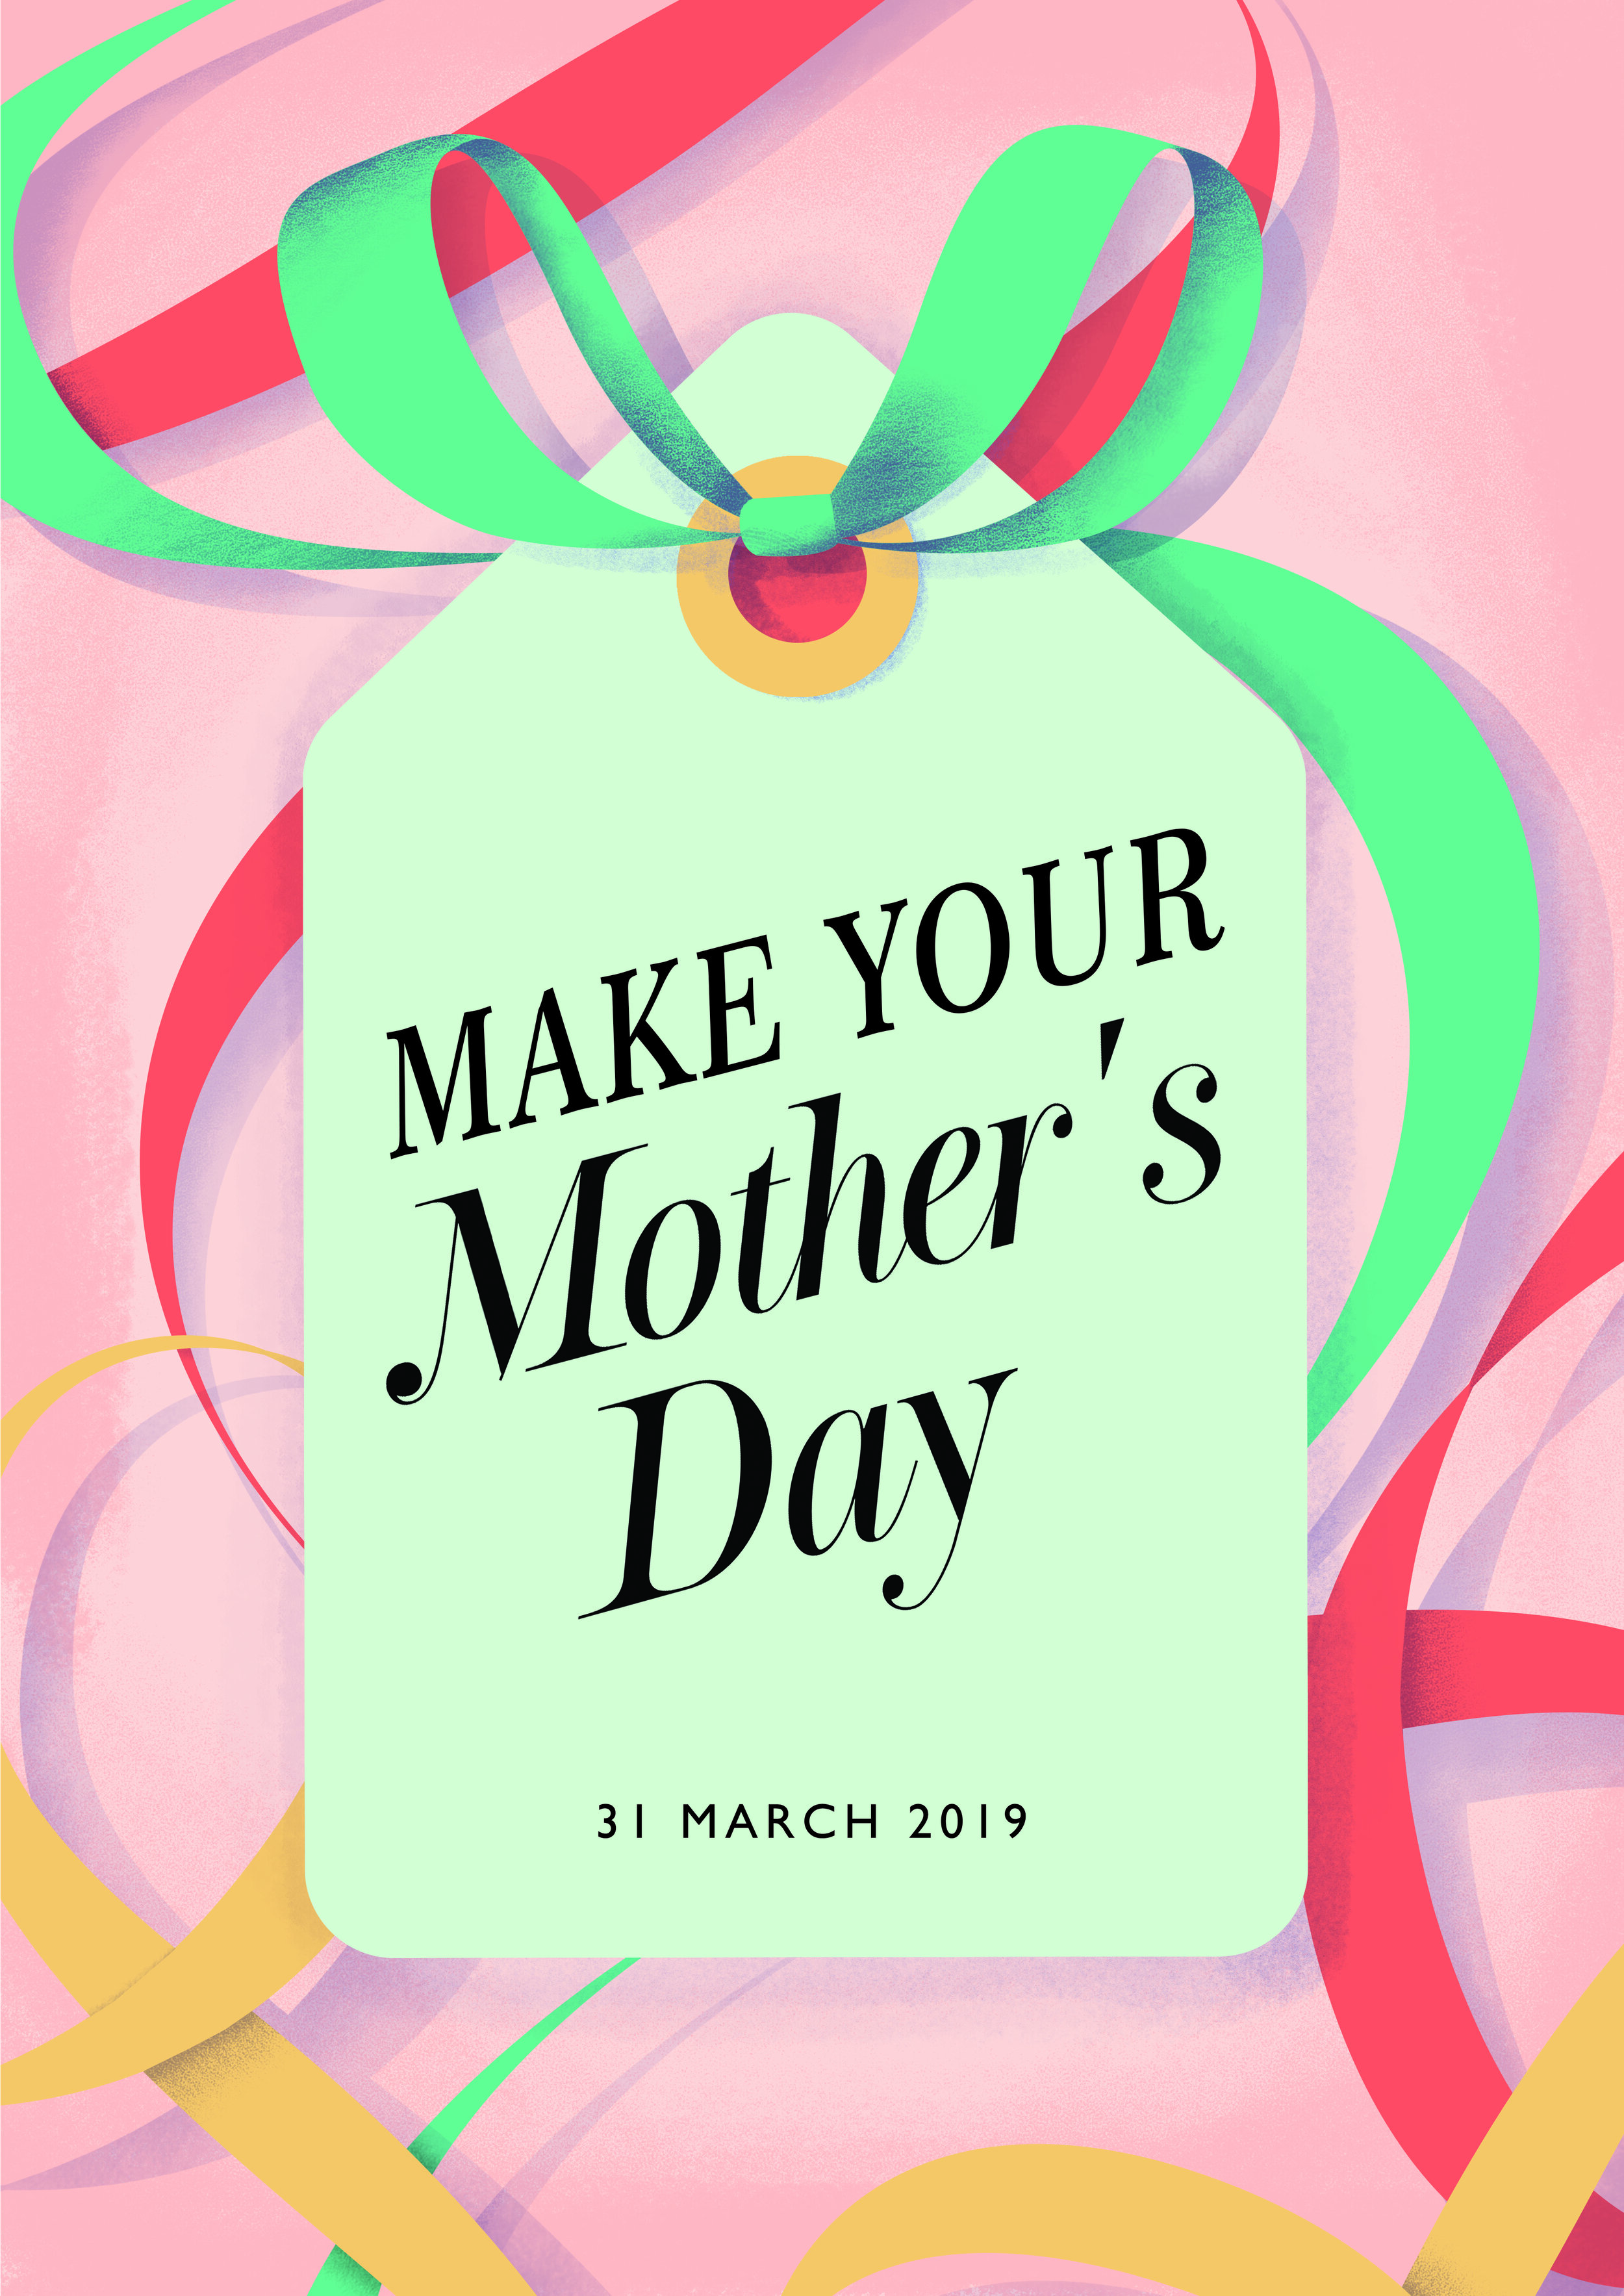 FM_Mothers Day 2019_AW-01.jpg